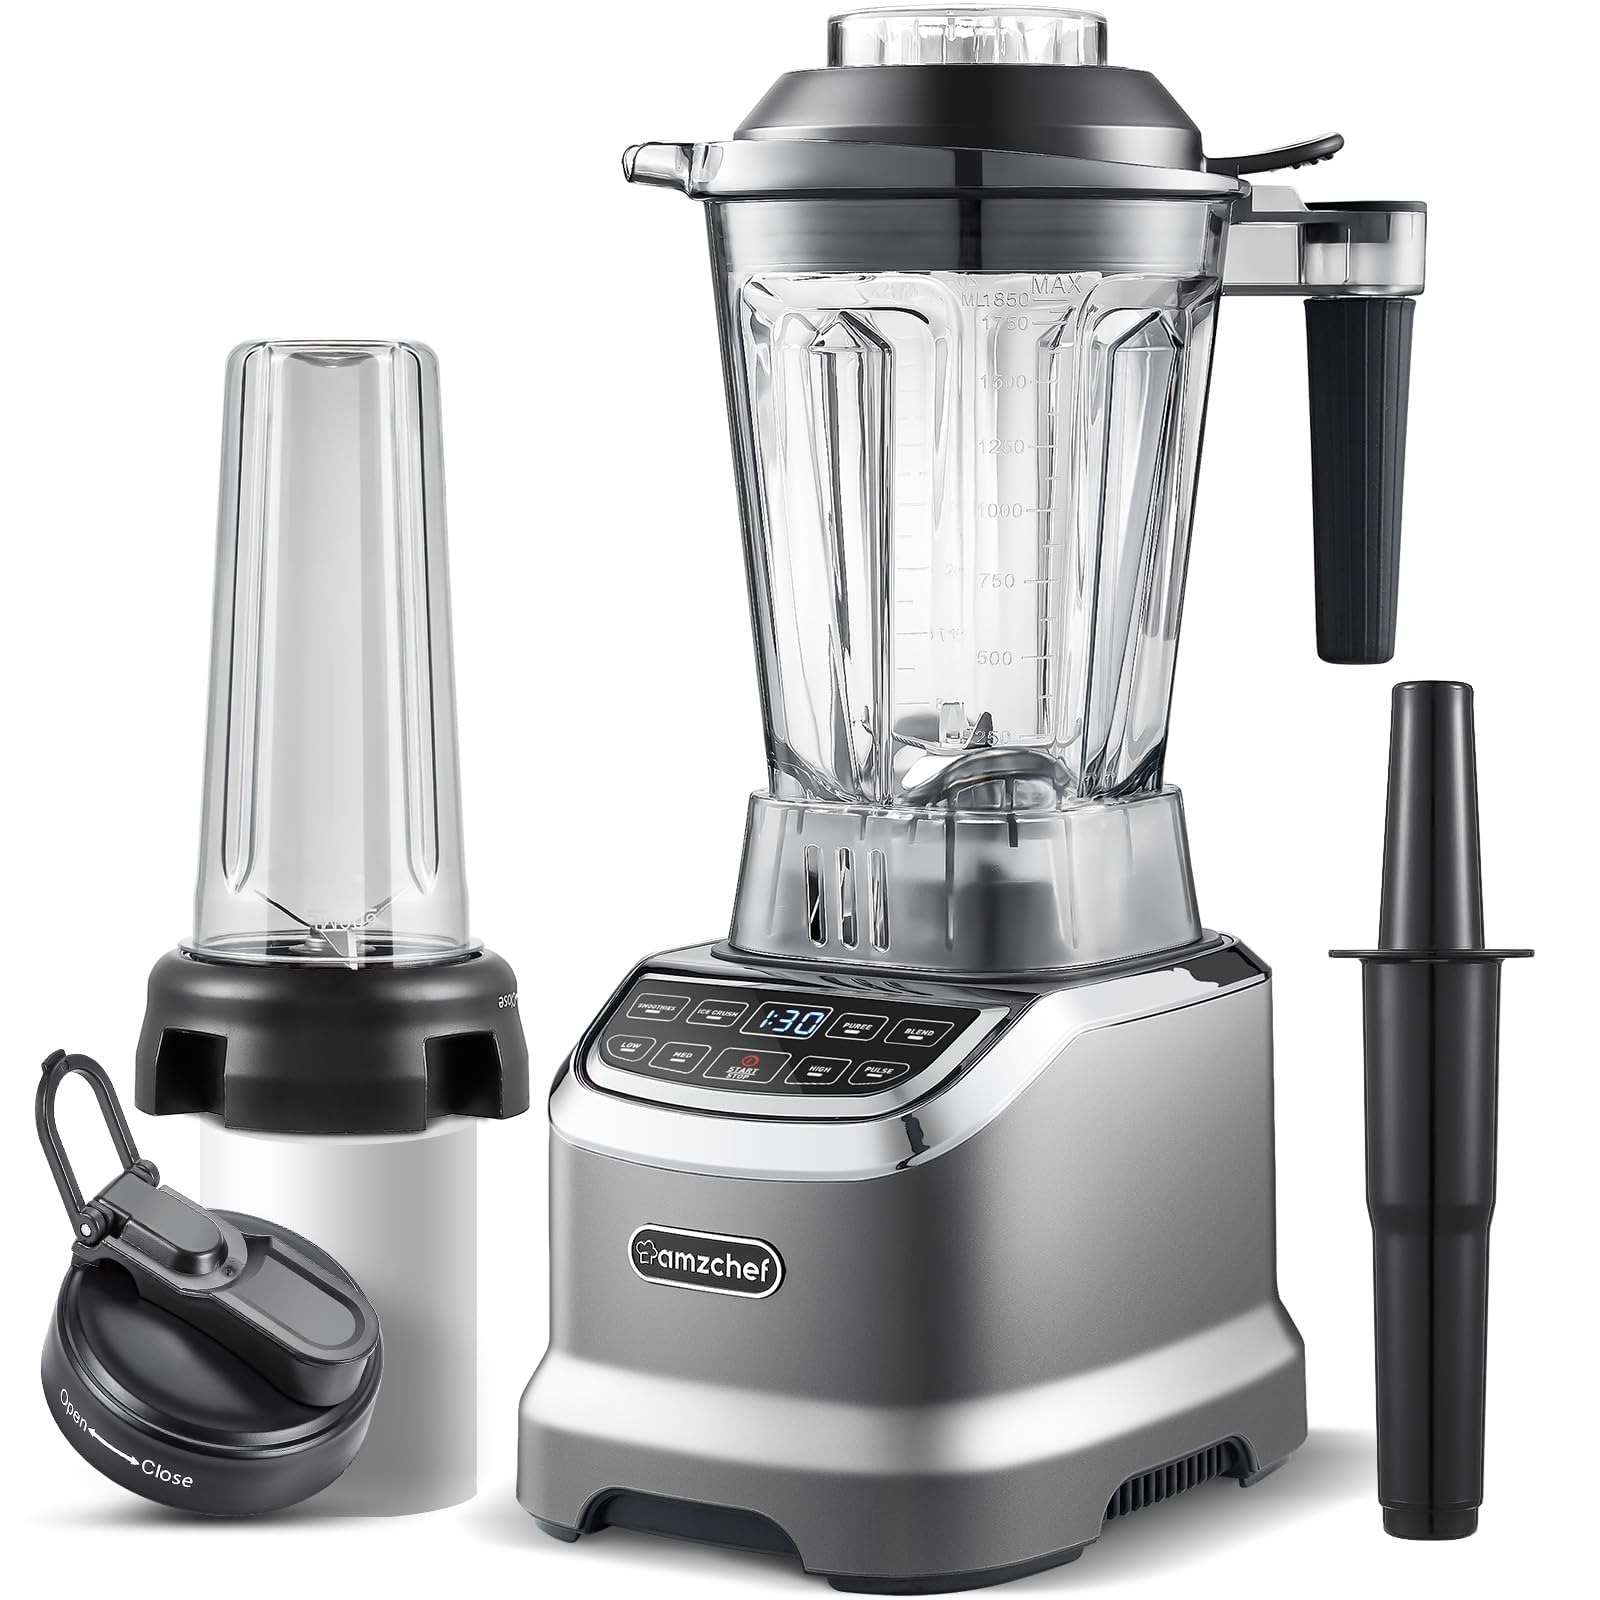 https://ak1.ostkcdn.com/images/products/is/images/direct/c4b0485e9133e2f12909c5983466d00f01aa99ac/Smoothie-Countertop-Blender%2C-1800-W-Blender-for-Kitchen-with-600ml-Travel-bottle%2C-High-Speed-Blender-for-Shakes%2C-Smoothies.jpg